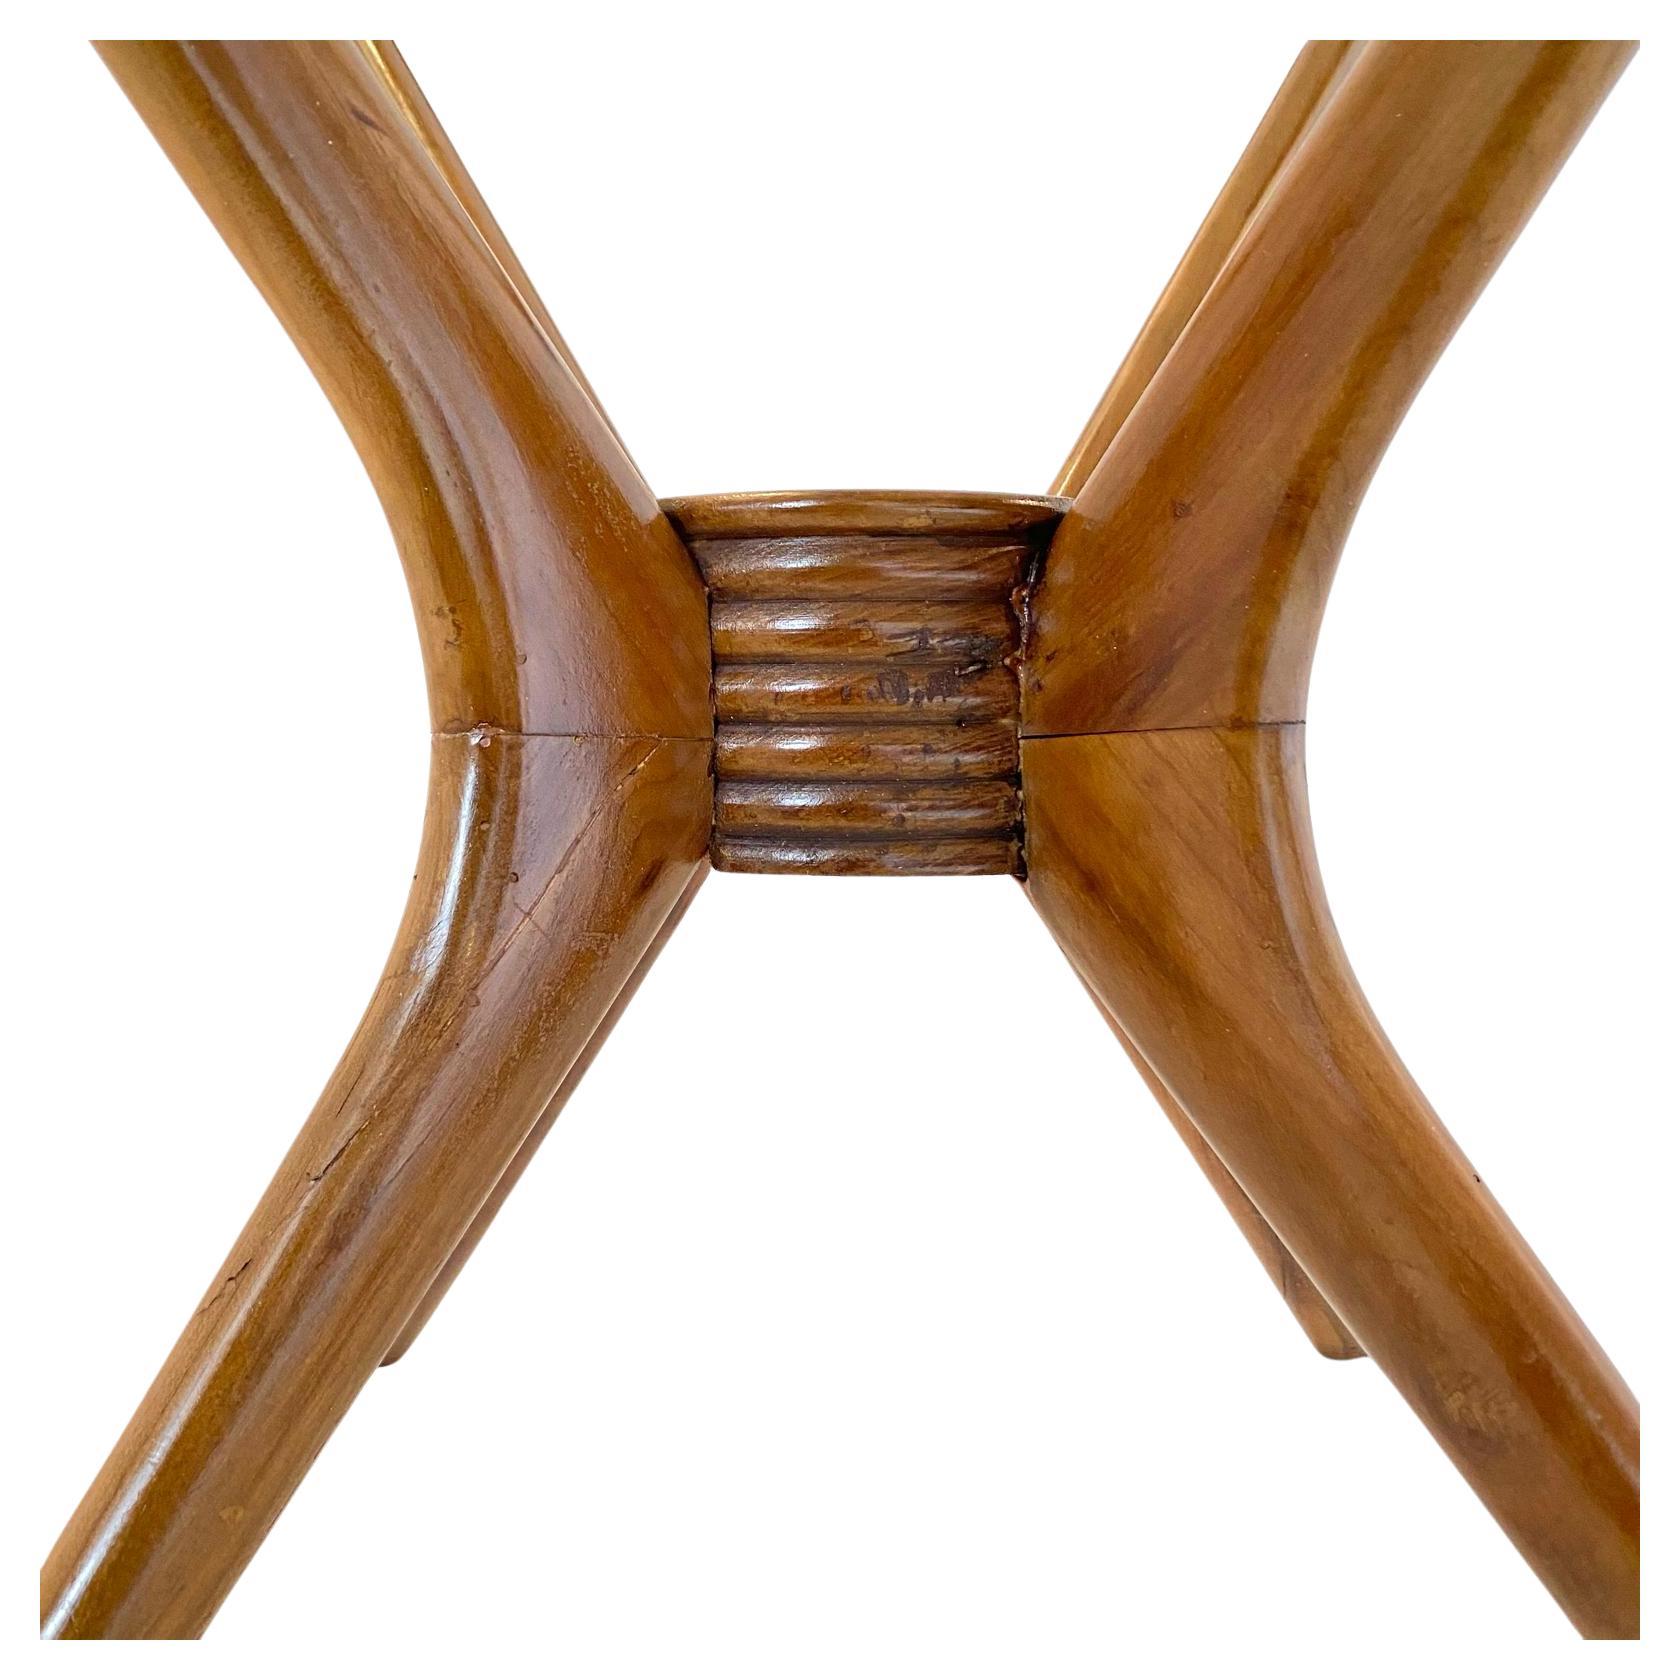 Spider Legs Round Wood Coffee Table, Paolo Buffa for Brugnoli, Italy 1950's For Sale 1